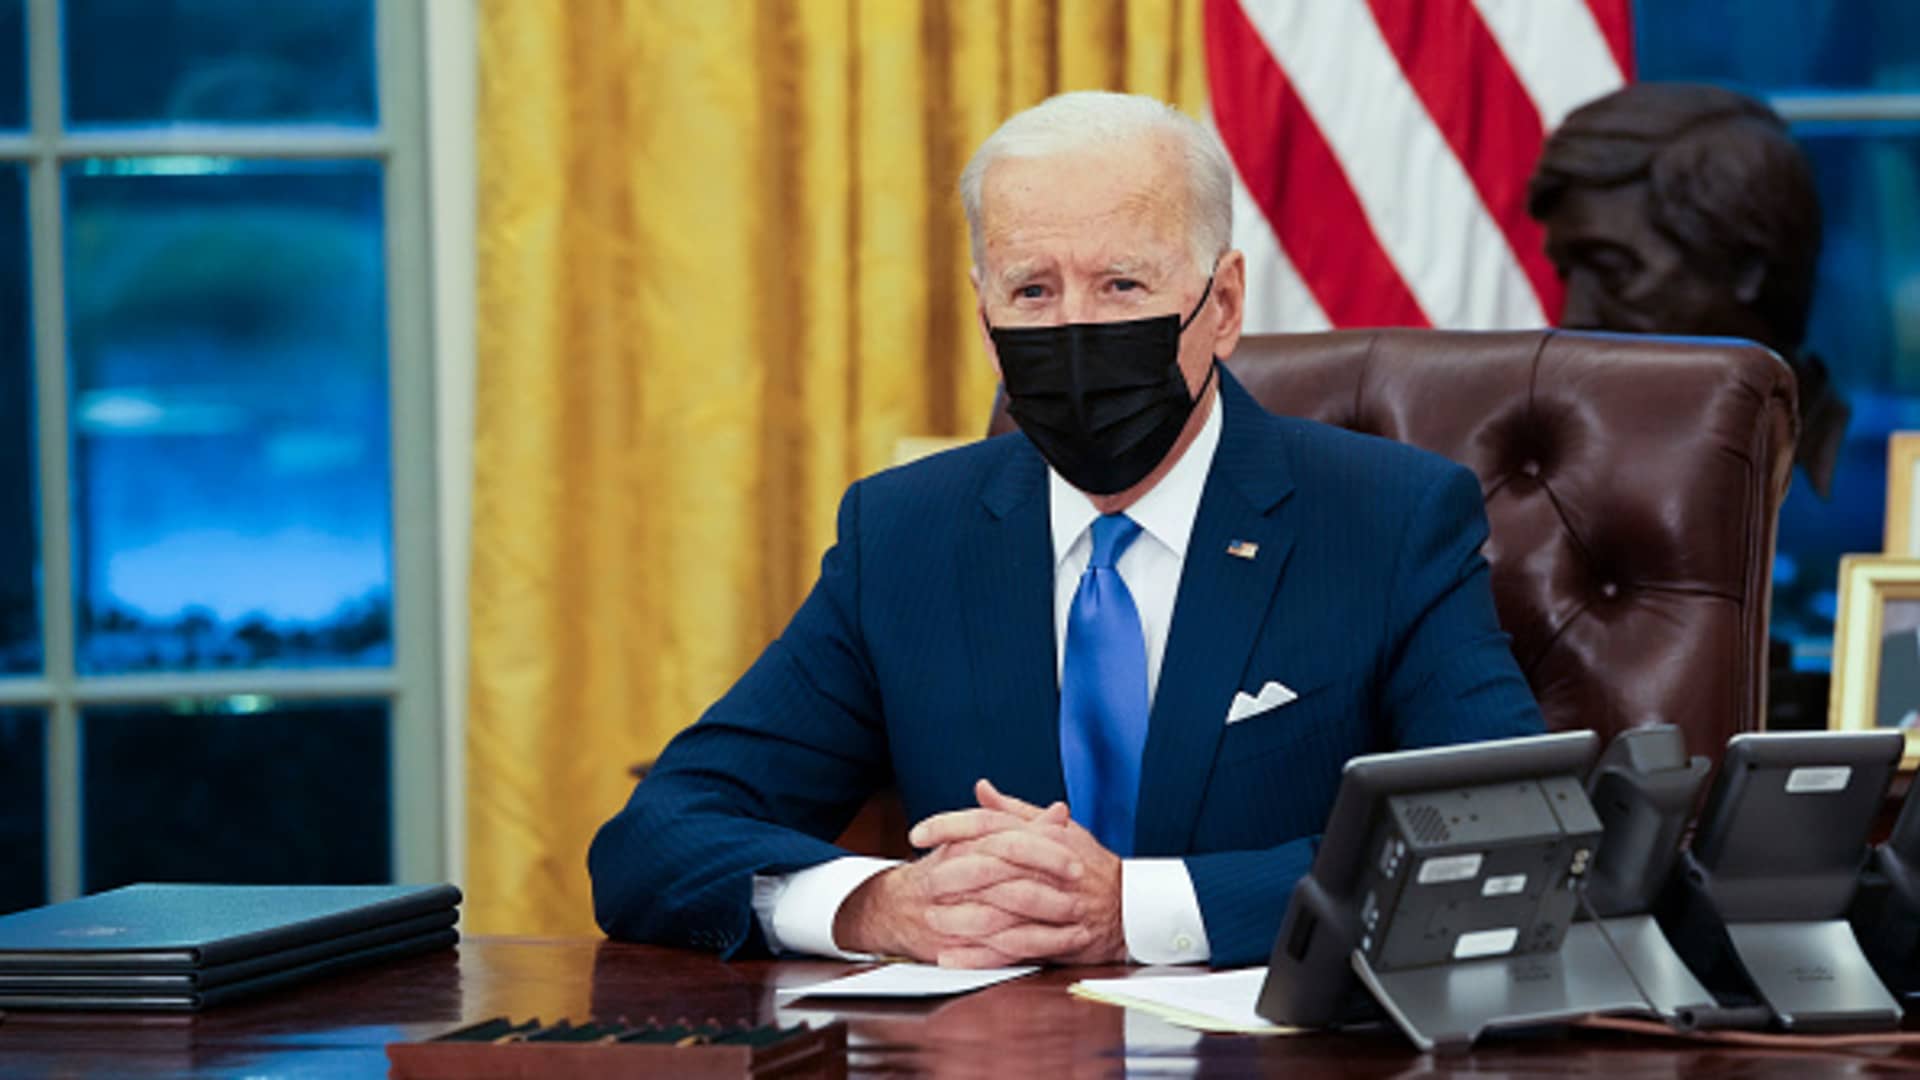 President Joe Biden makes brief remarks before signing several executive orders directing immigration actions for his administration in the Oval Office at the White House on February 02, 2021 in Washington, DC.